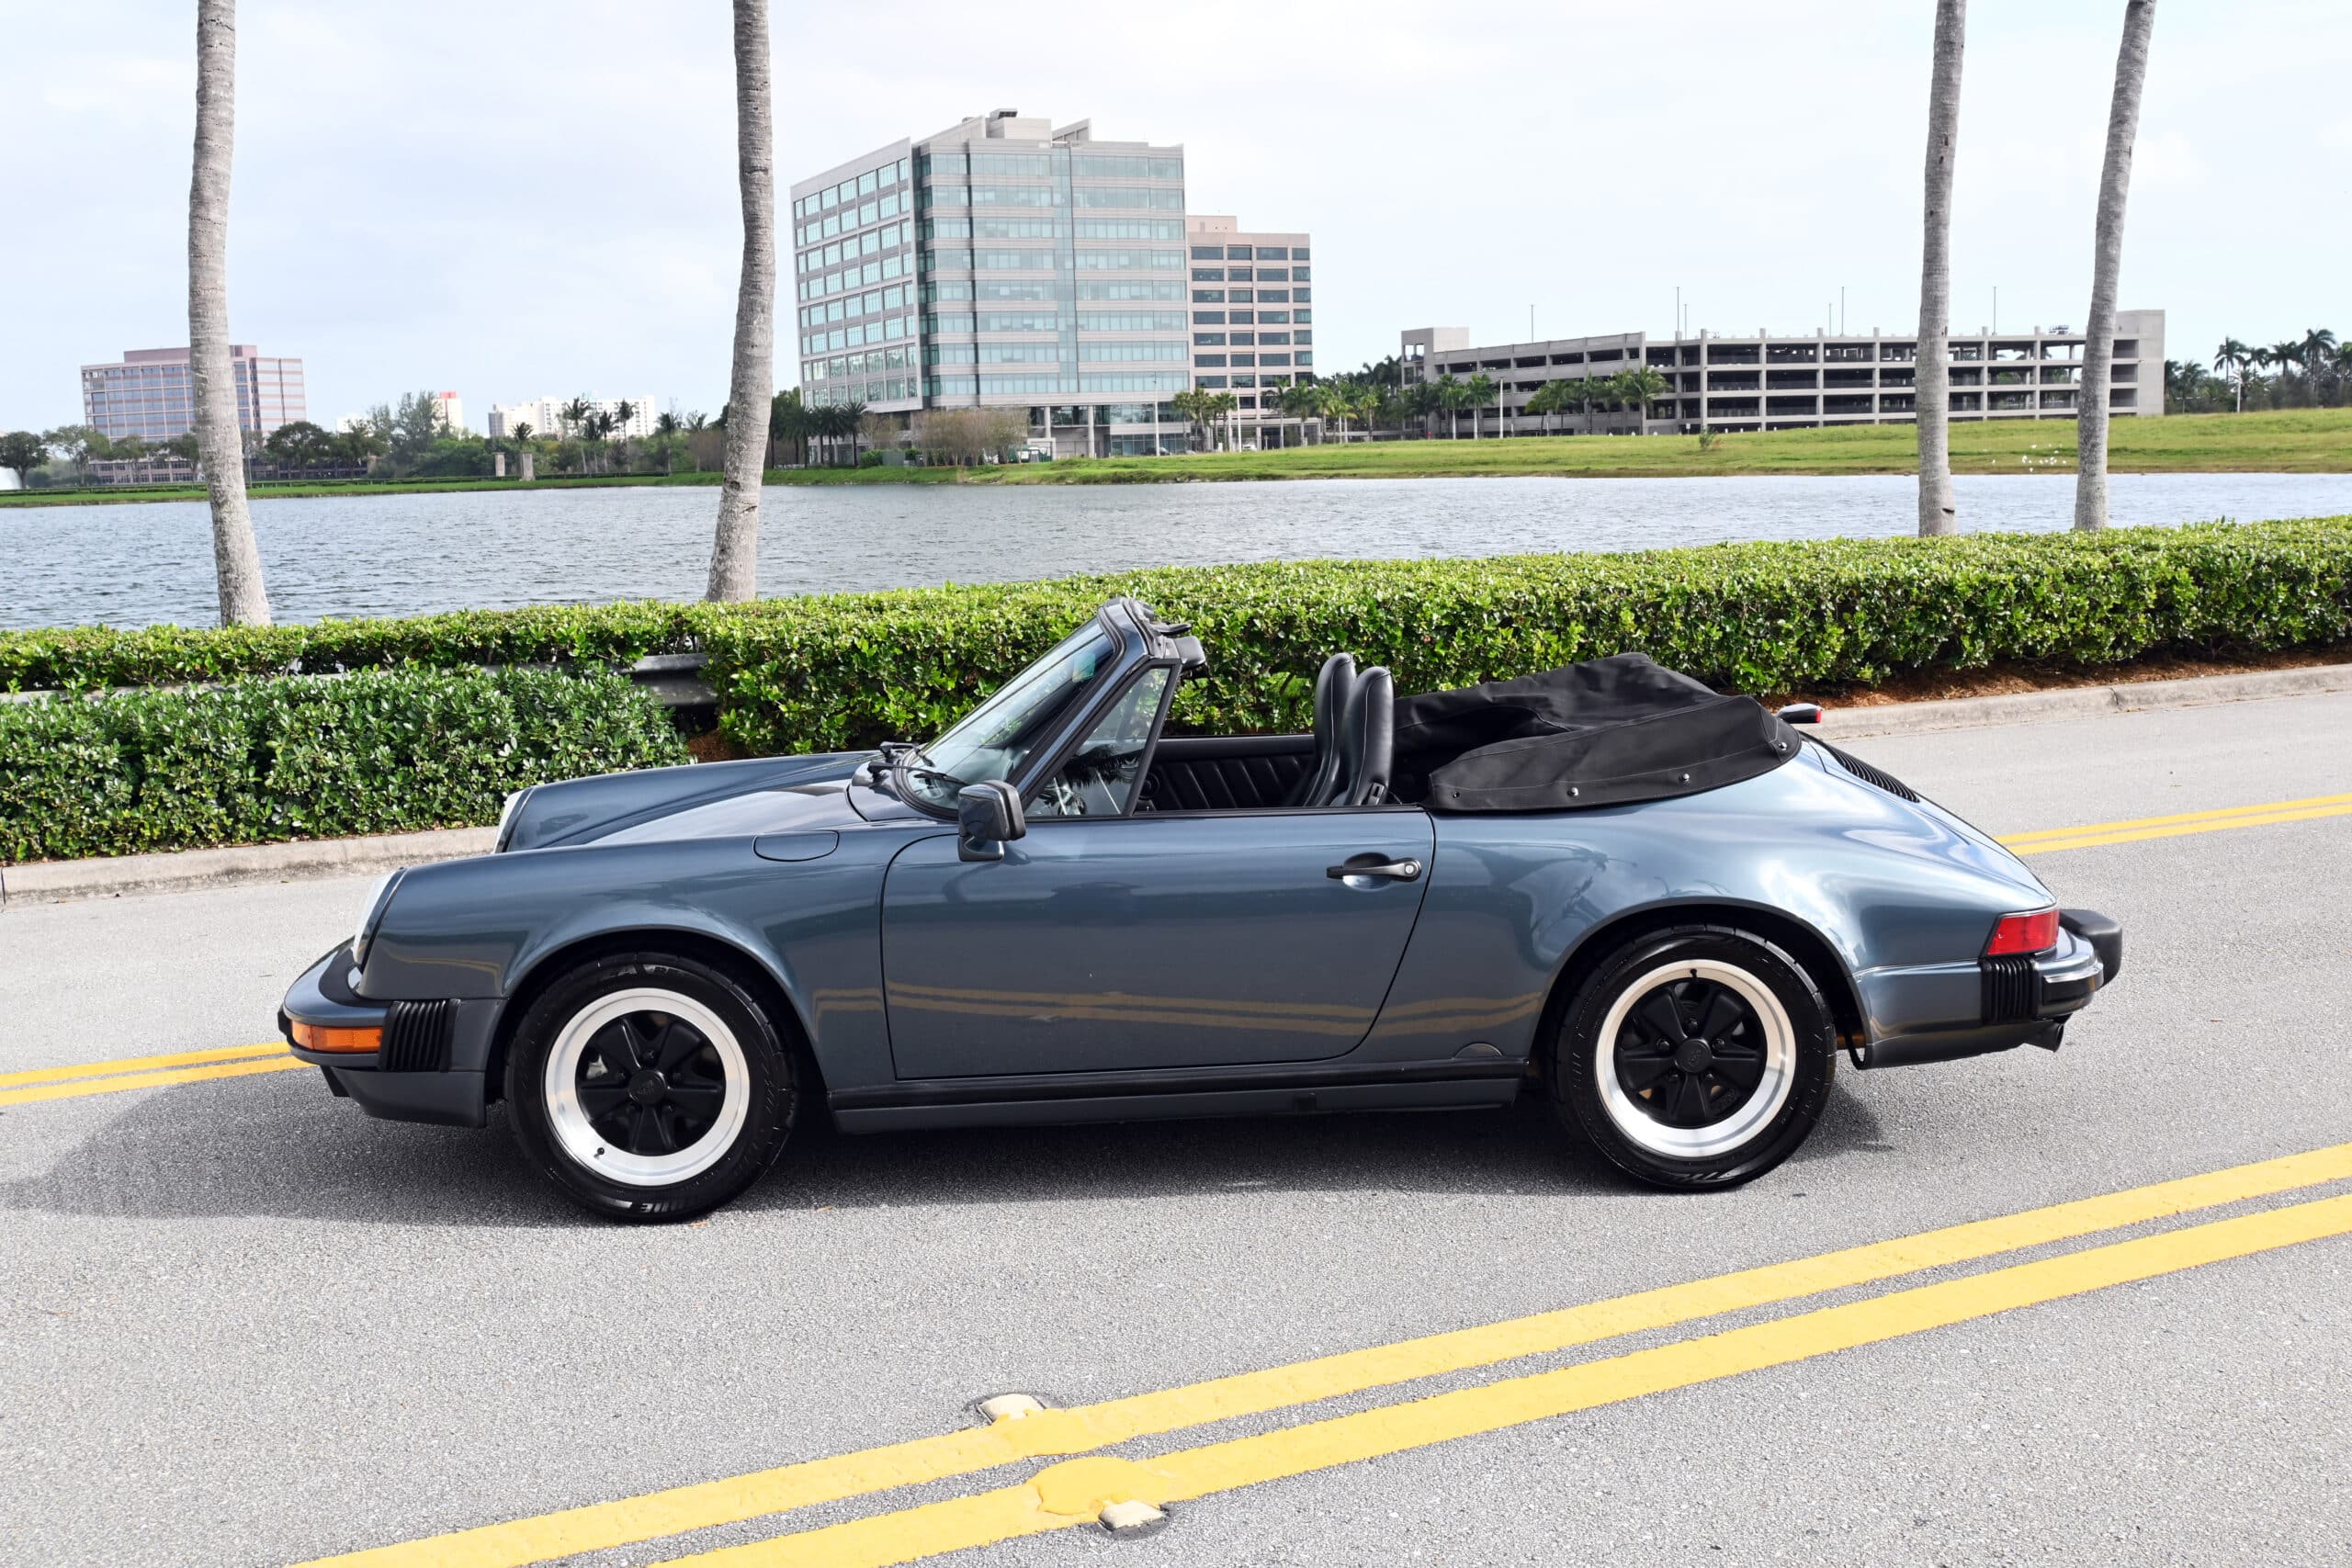 1987 Porsche 911 Carrera, G50 transmission!, documented miles with service  records and service manual, outstanding condition, books, tools - RMCMiami